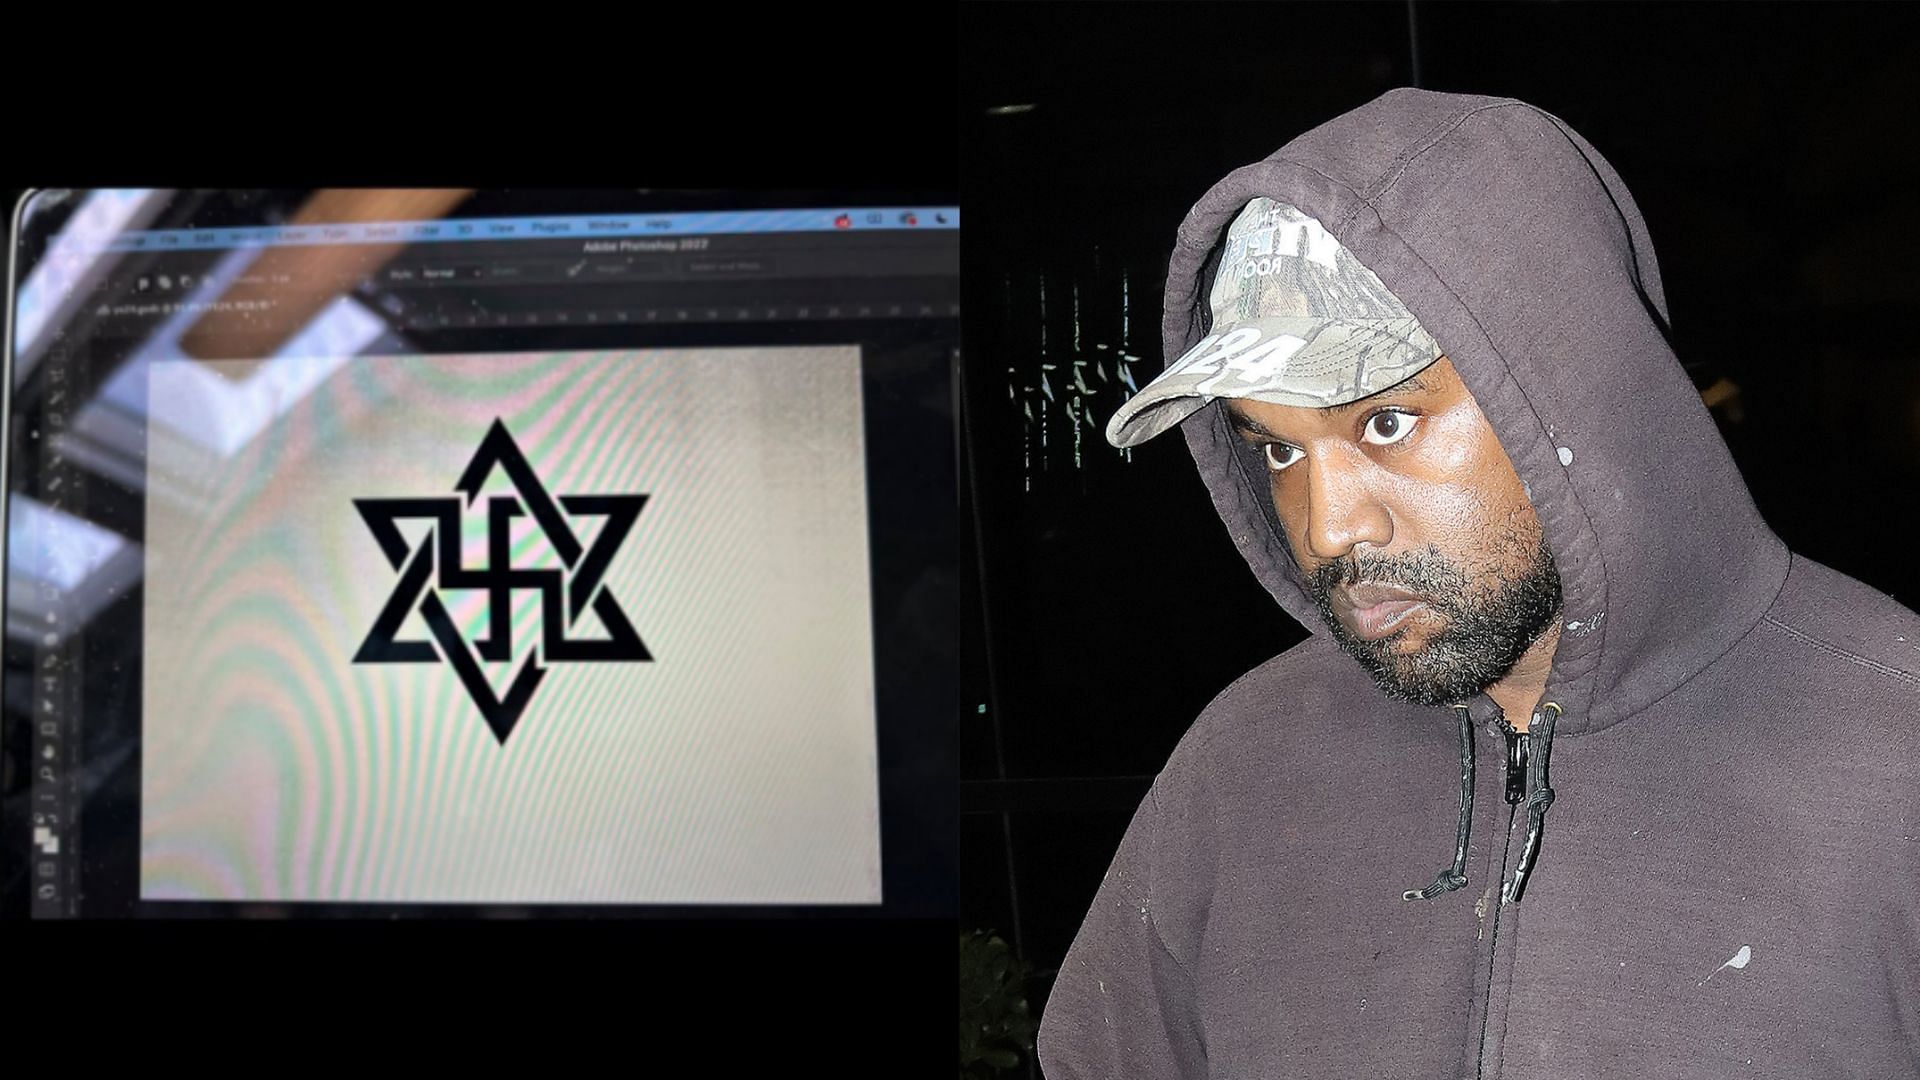 Kanye West posts image of swastika inside the Star of David on Twitter (Image via kanyewest/Twitter and Getty Images)